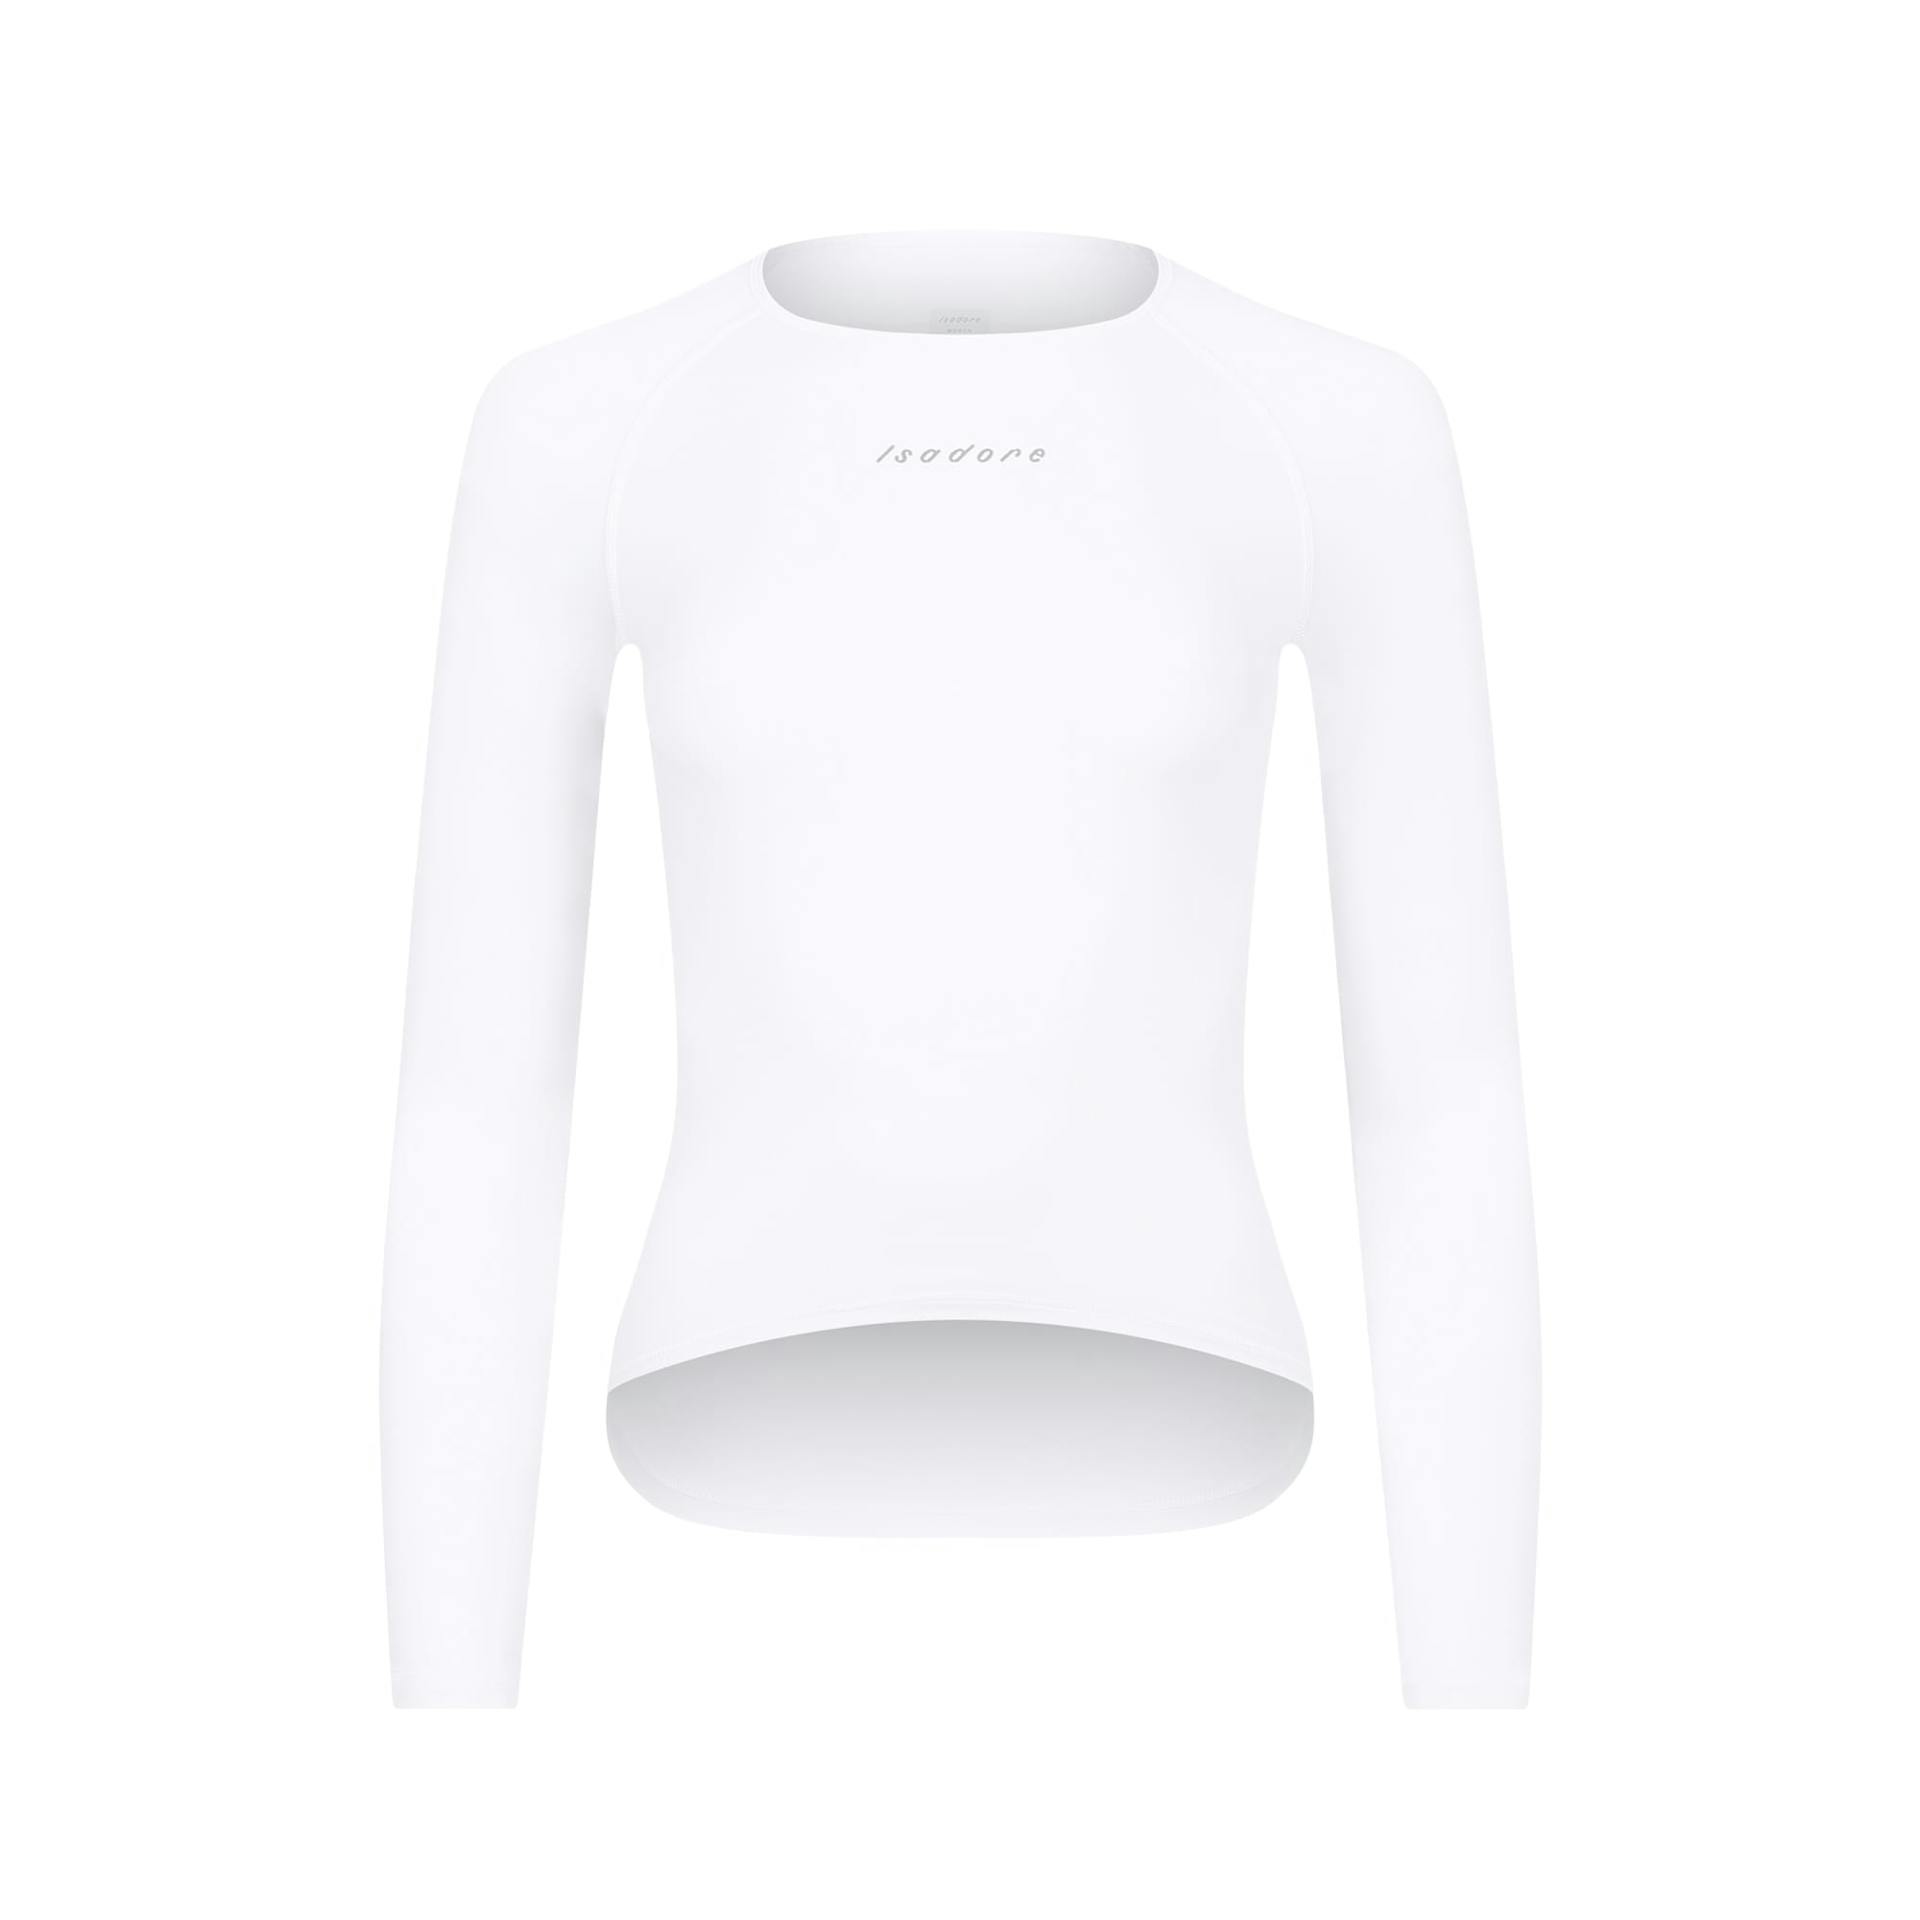 Women's Cold Weather BaseLayer White